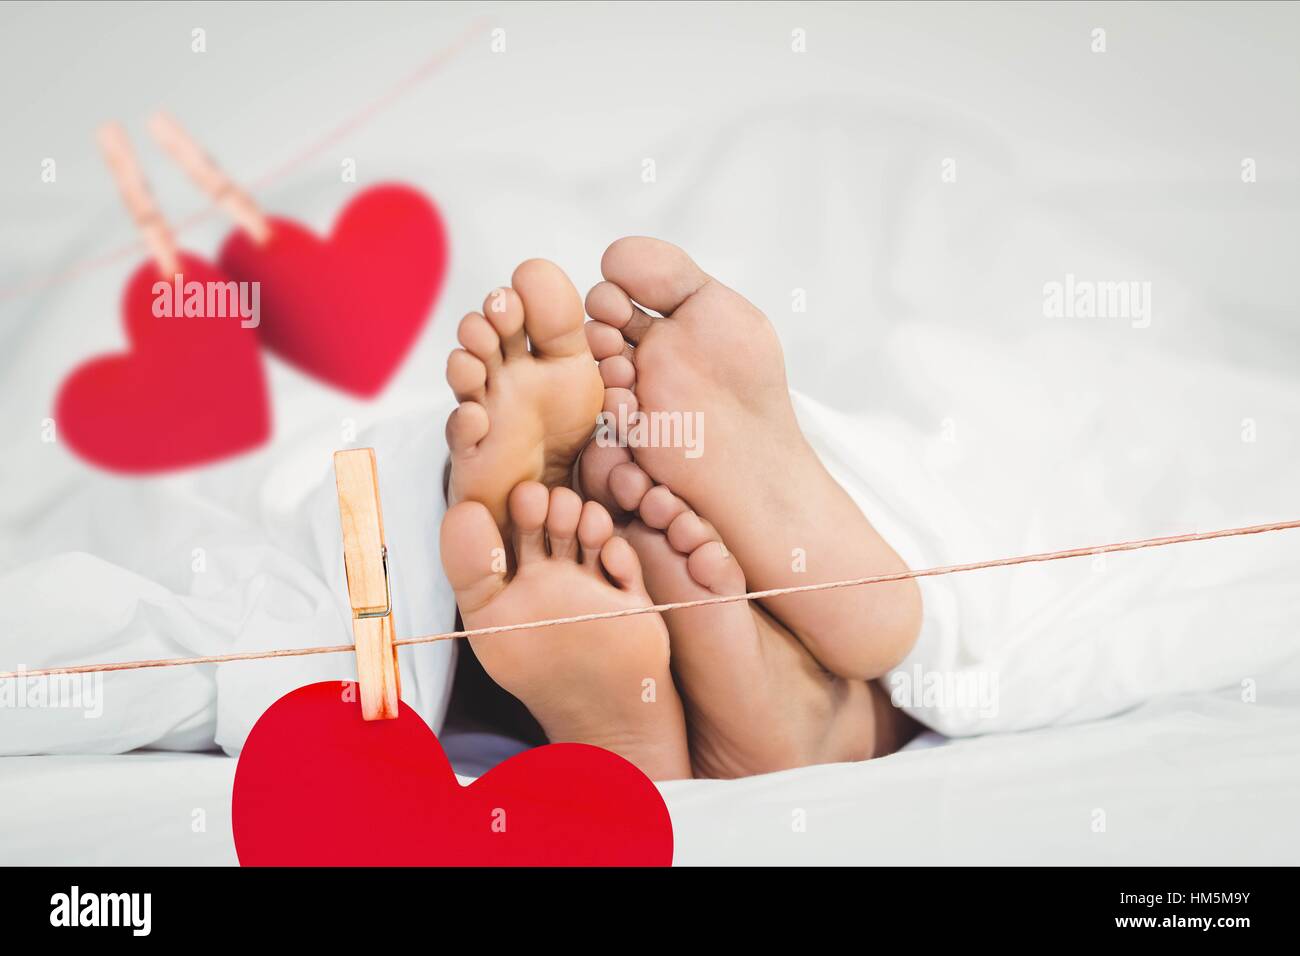 Composite image of red hanging hearts and couple lying on bed Stock Photo